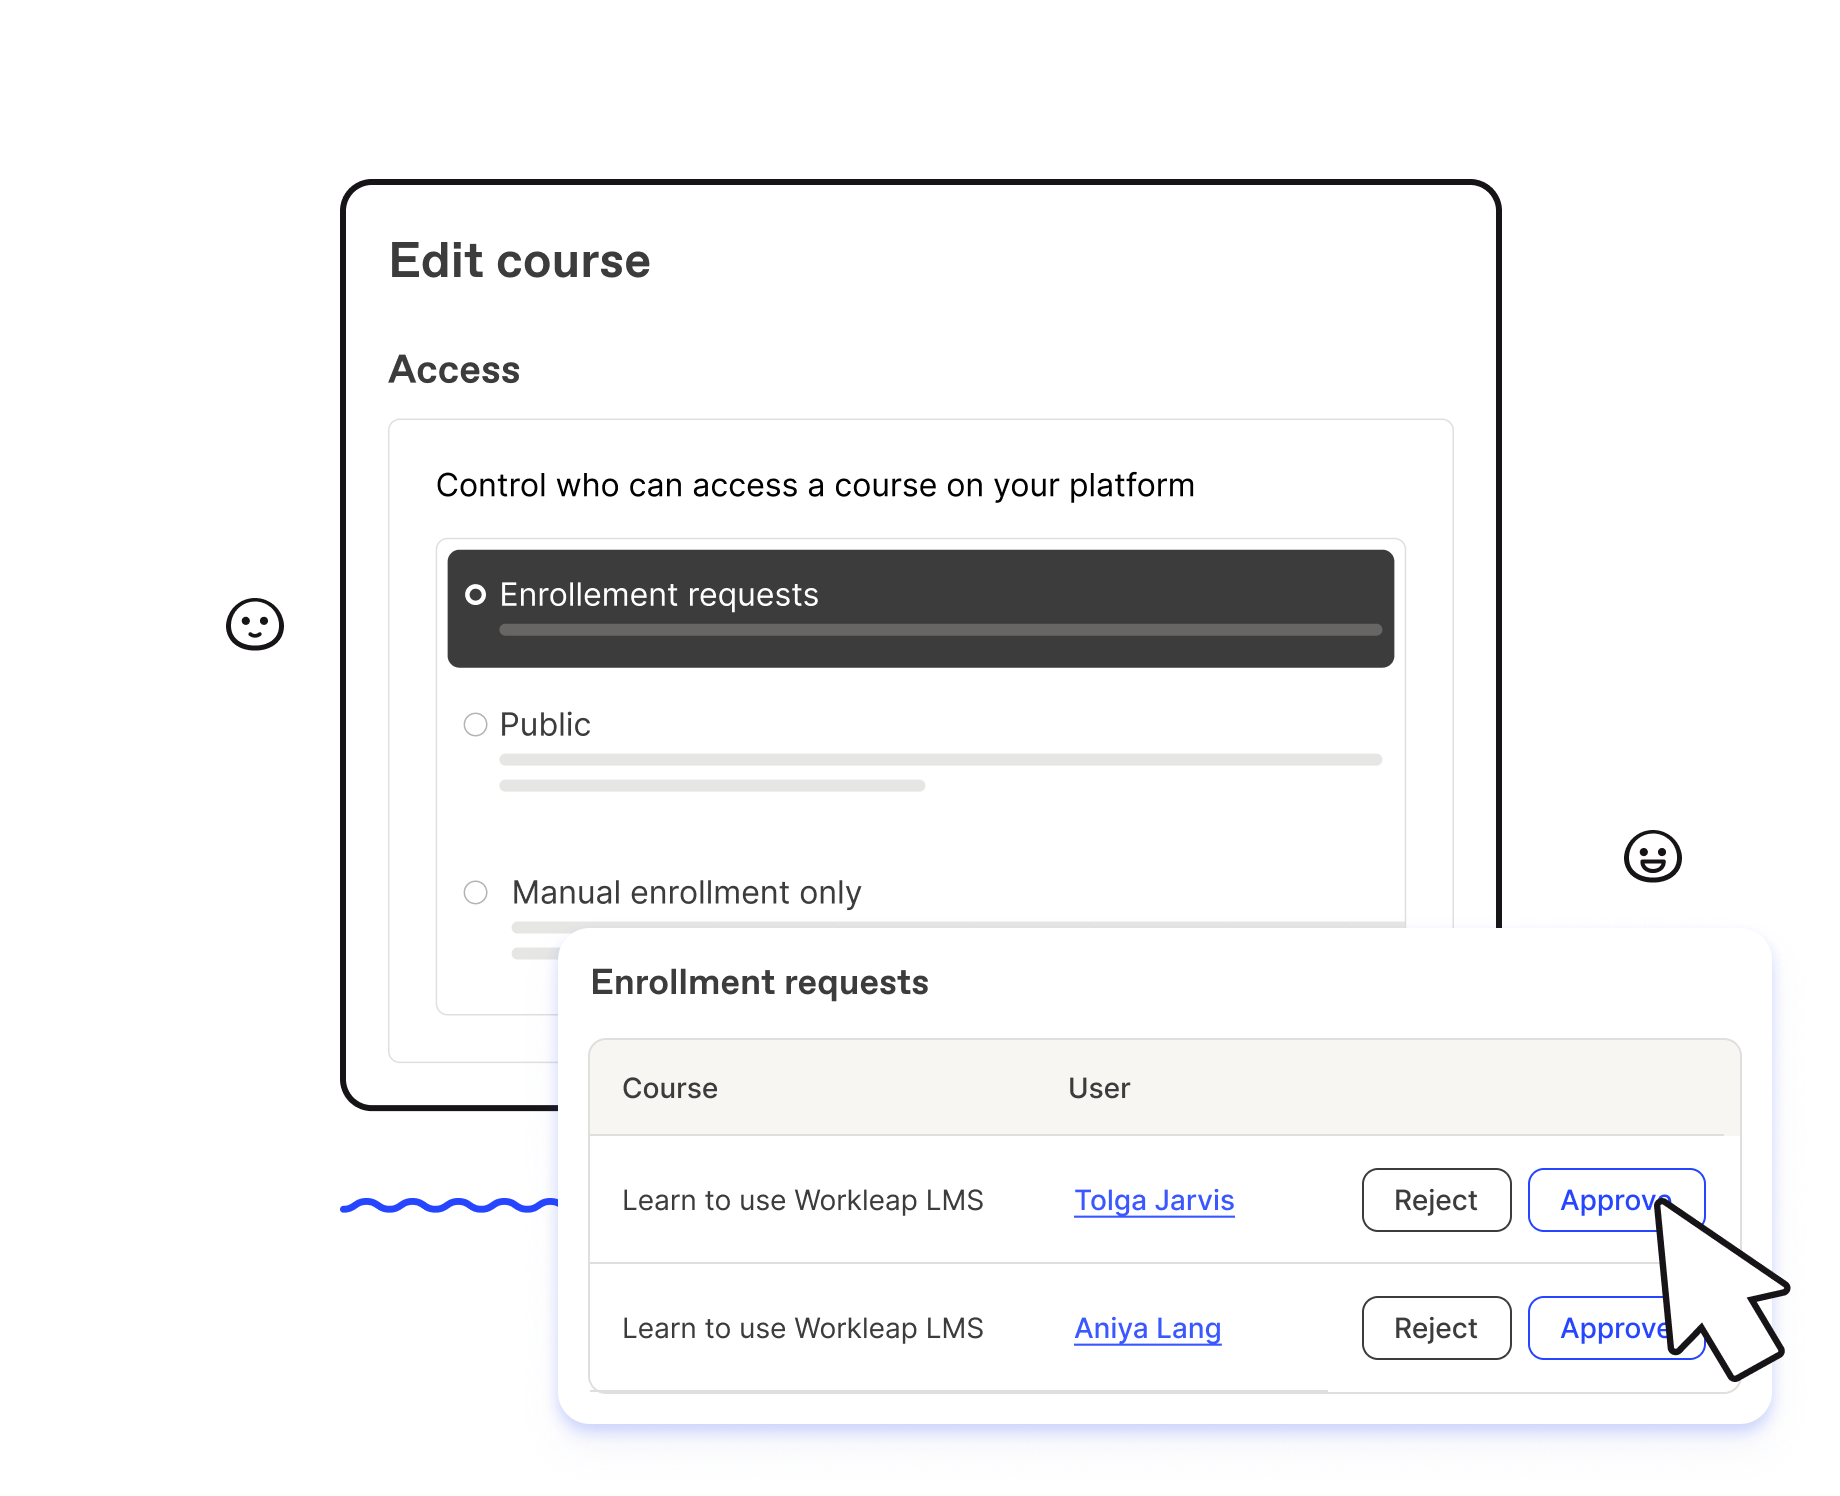 Managing enrollment requests in Workleap LMS to approve or reject access to a course for a specific user.